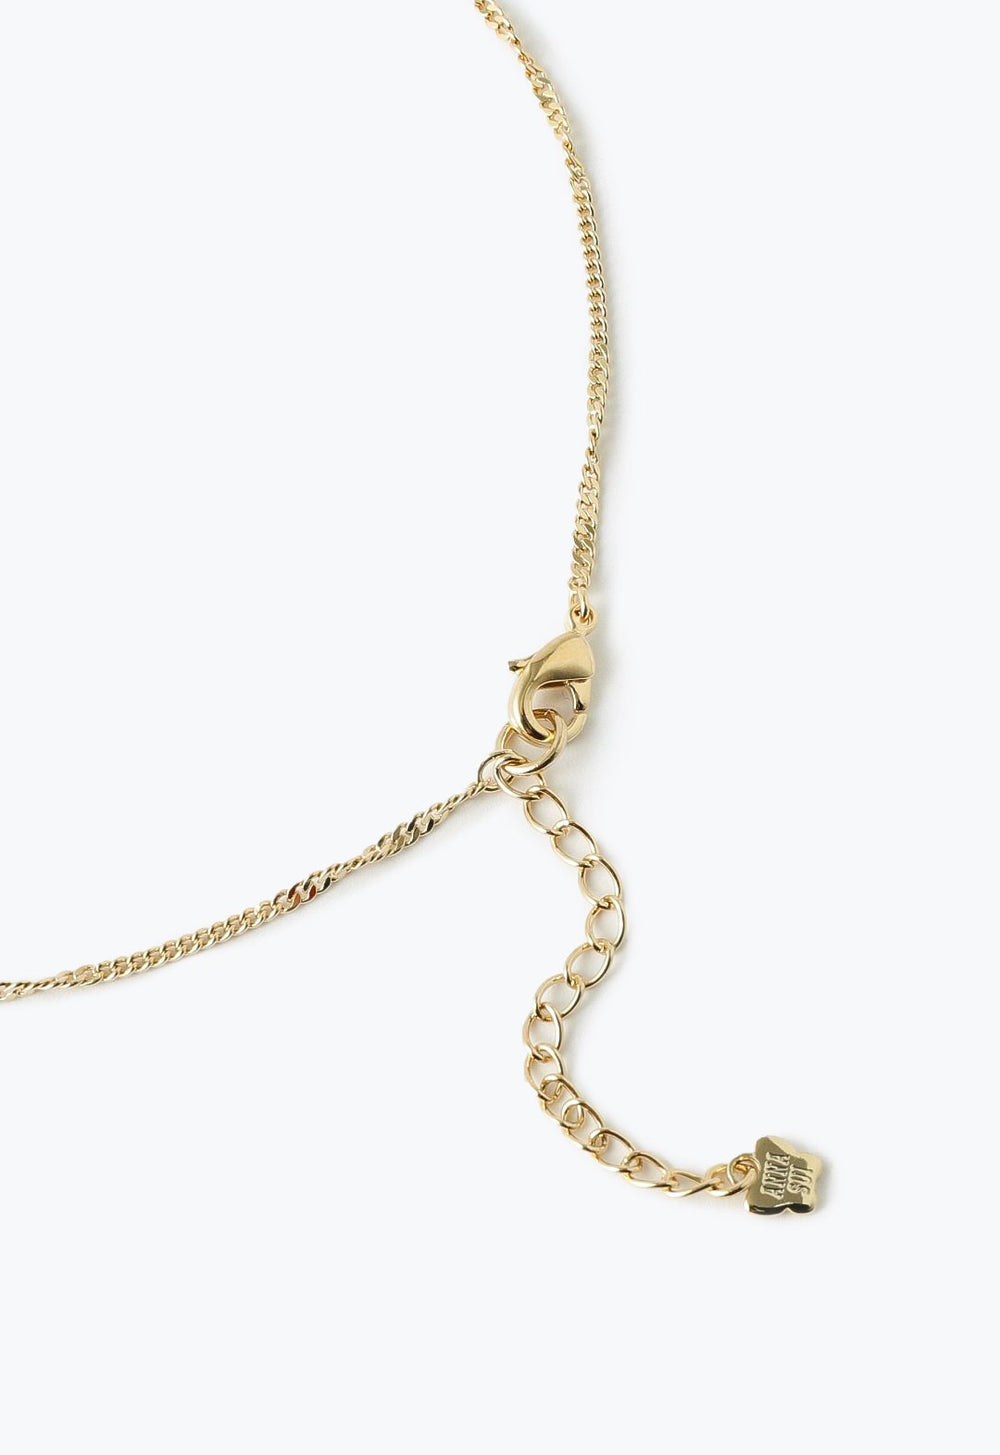 Gold chain, lobster claw clasp with large links for adjustability, Anna Sui imprint on a tag